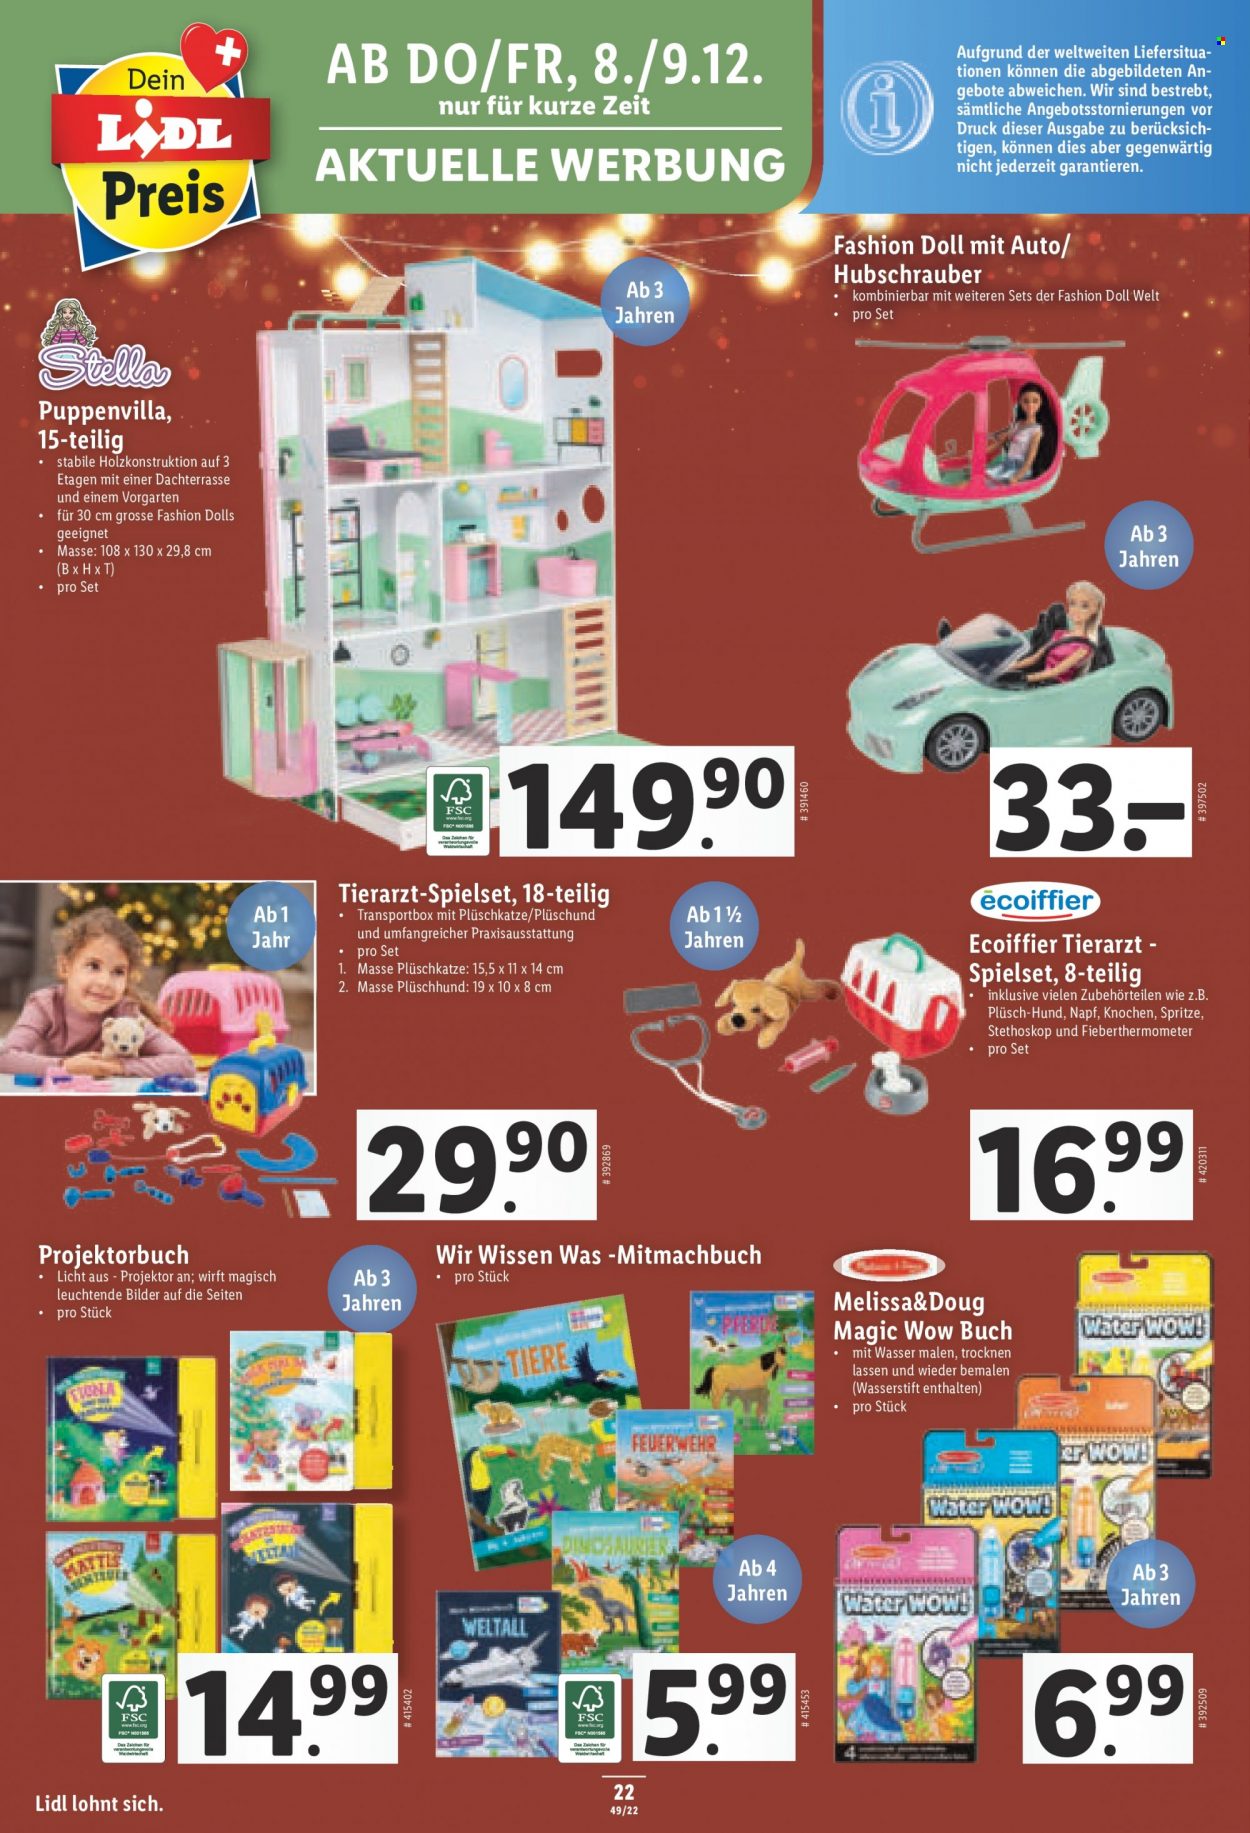 Catalogue Lidl - 8.12.2022 - 14.12.2022. Page 22.